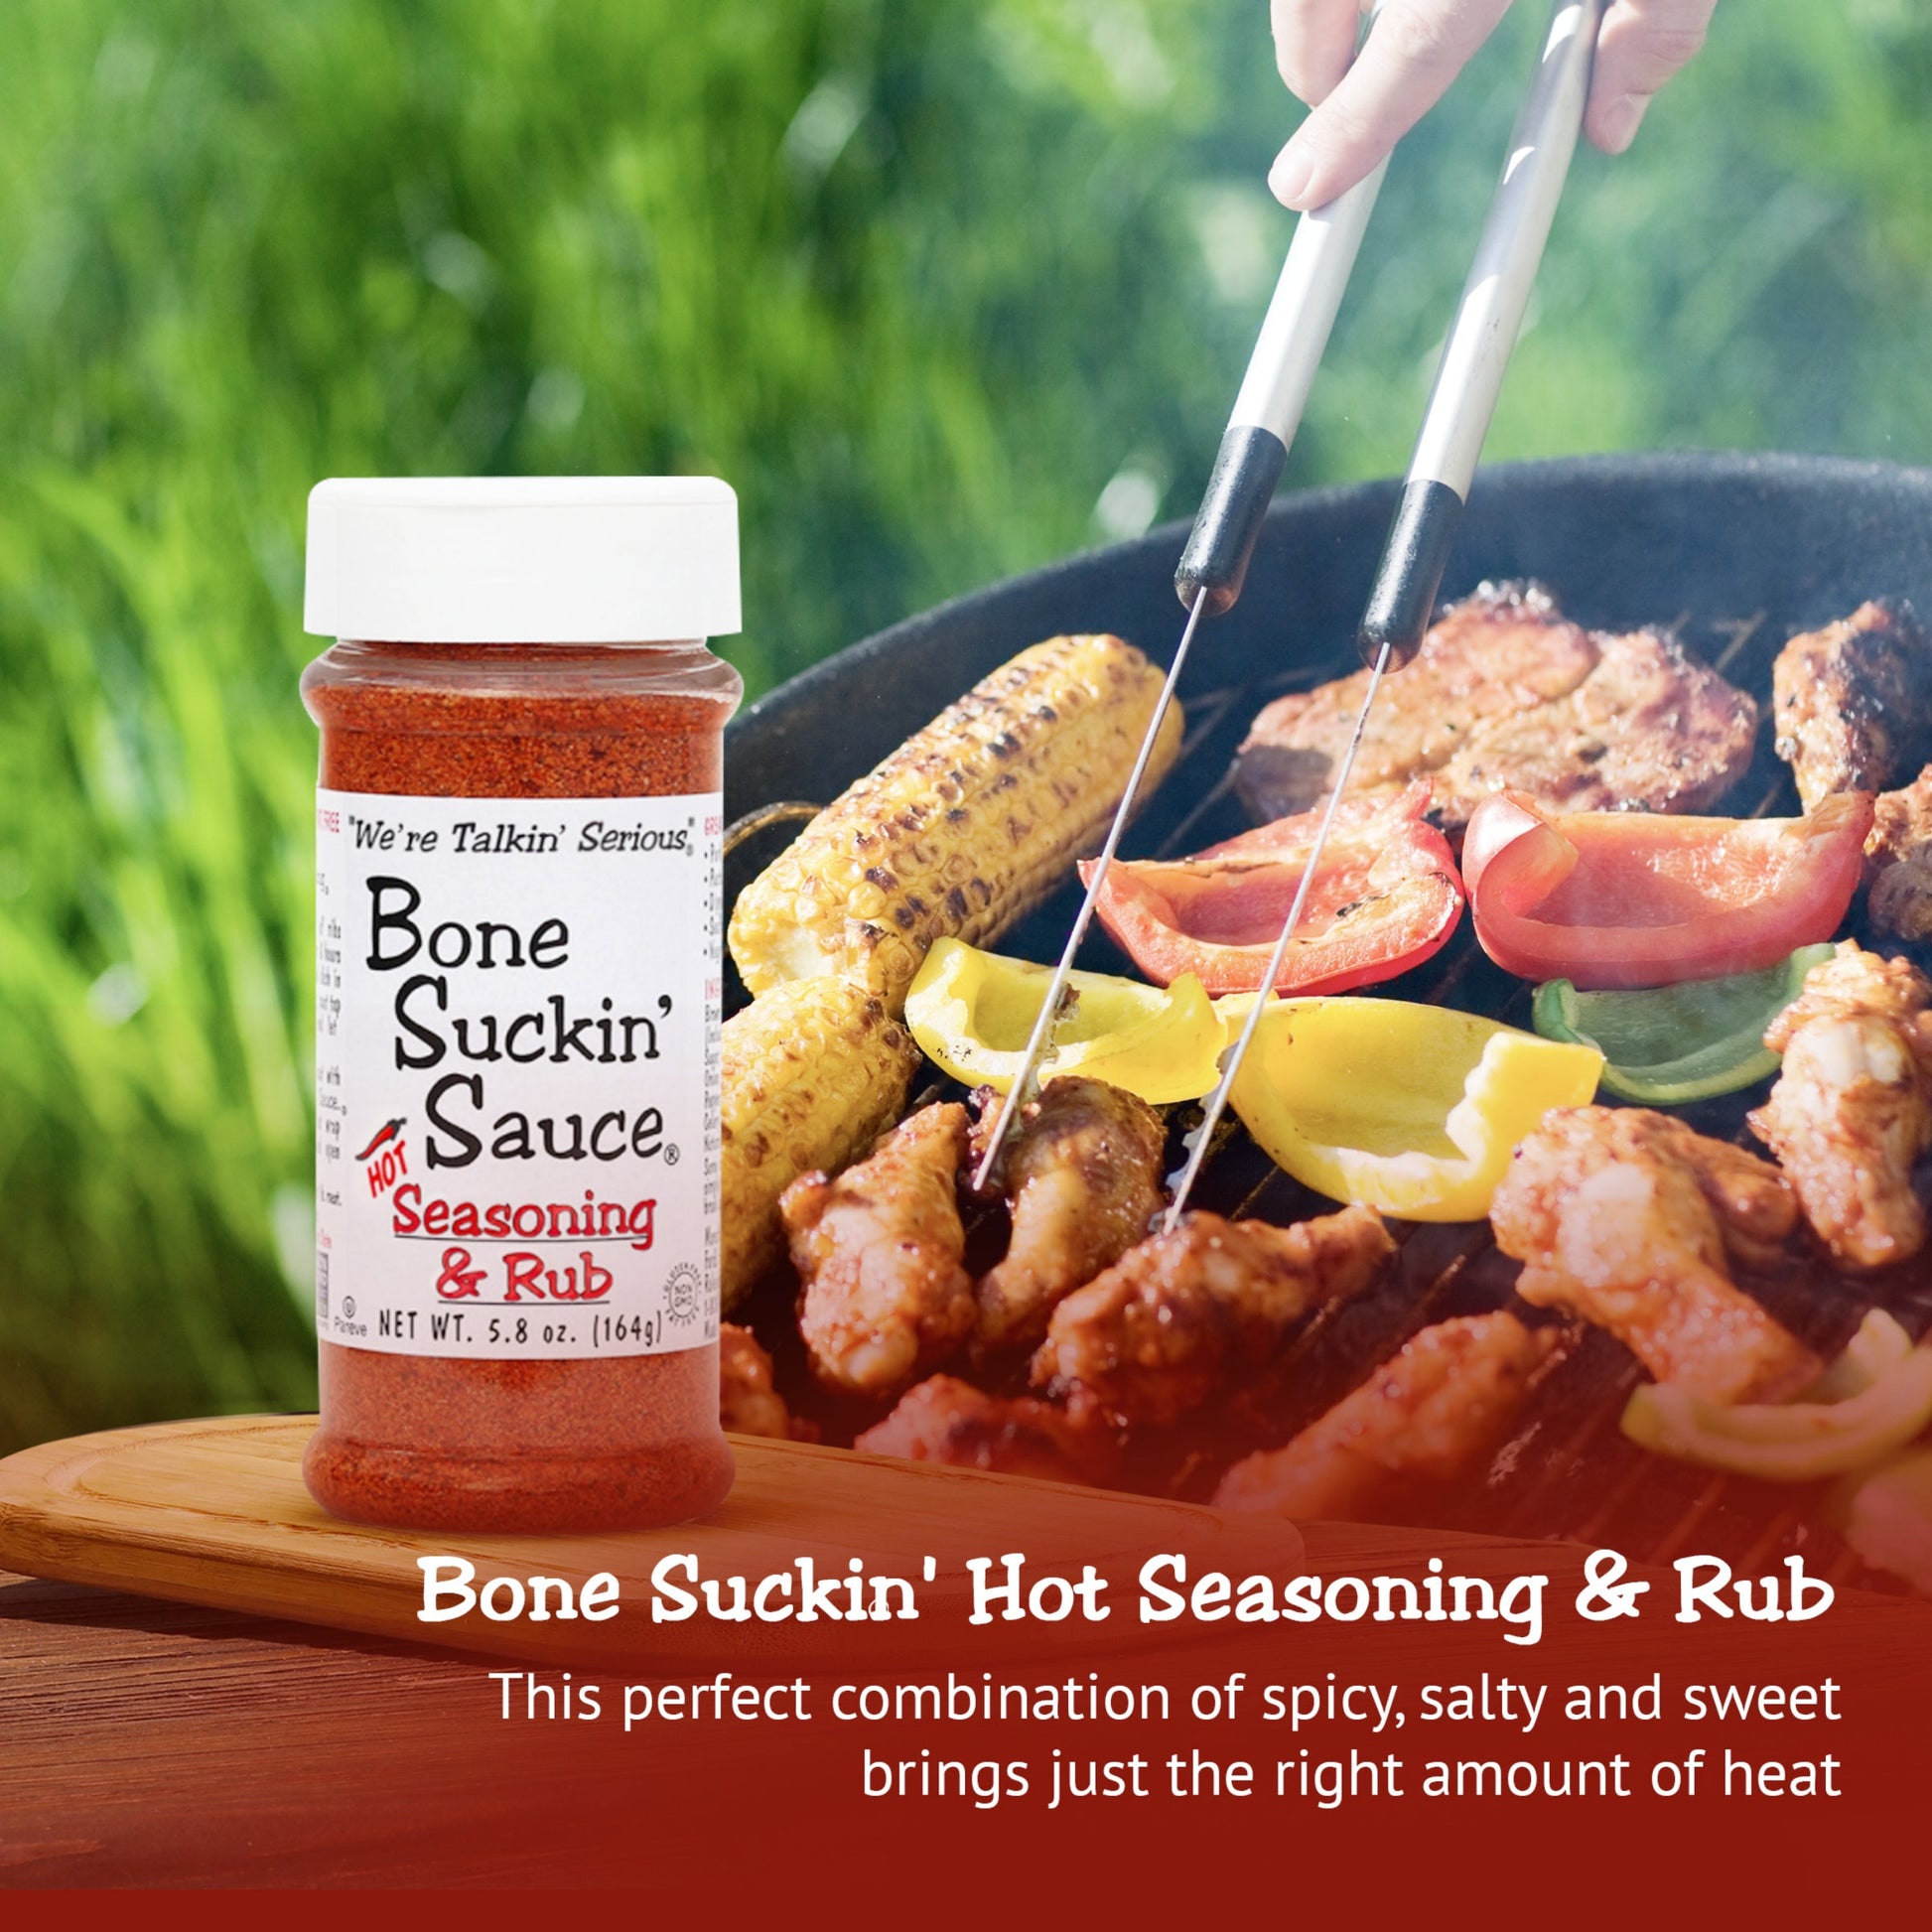 Bone Suckin Sauce Hot Seasoning & Rub, 5.8 oz. This perfect combination of spicy, salty and sweet brings just the right amount of heat.